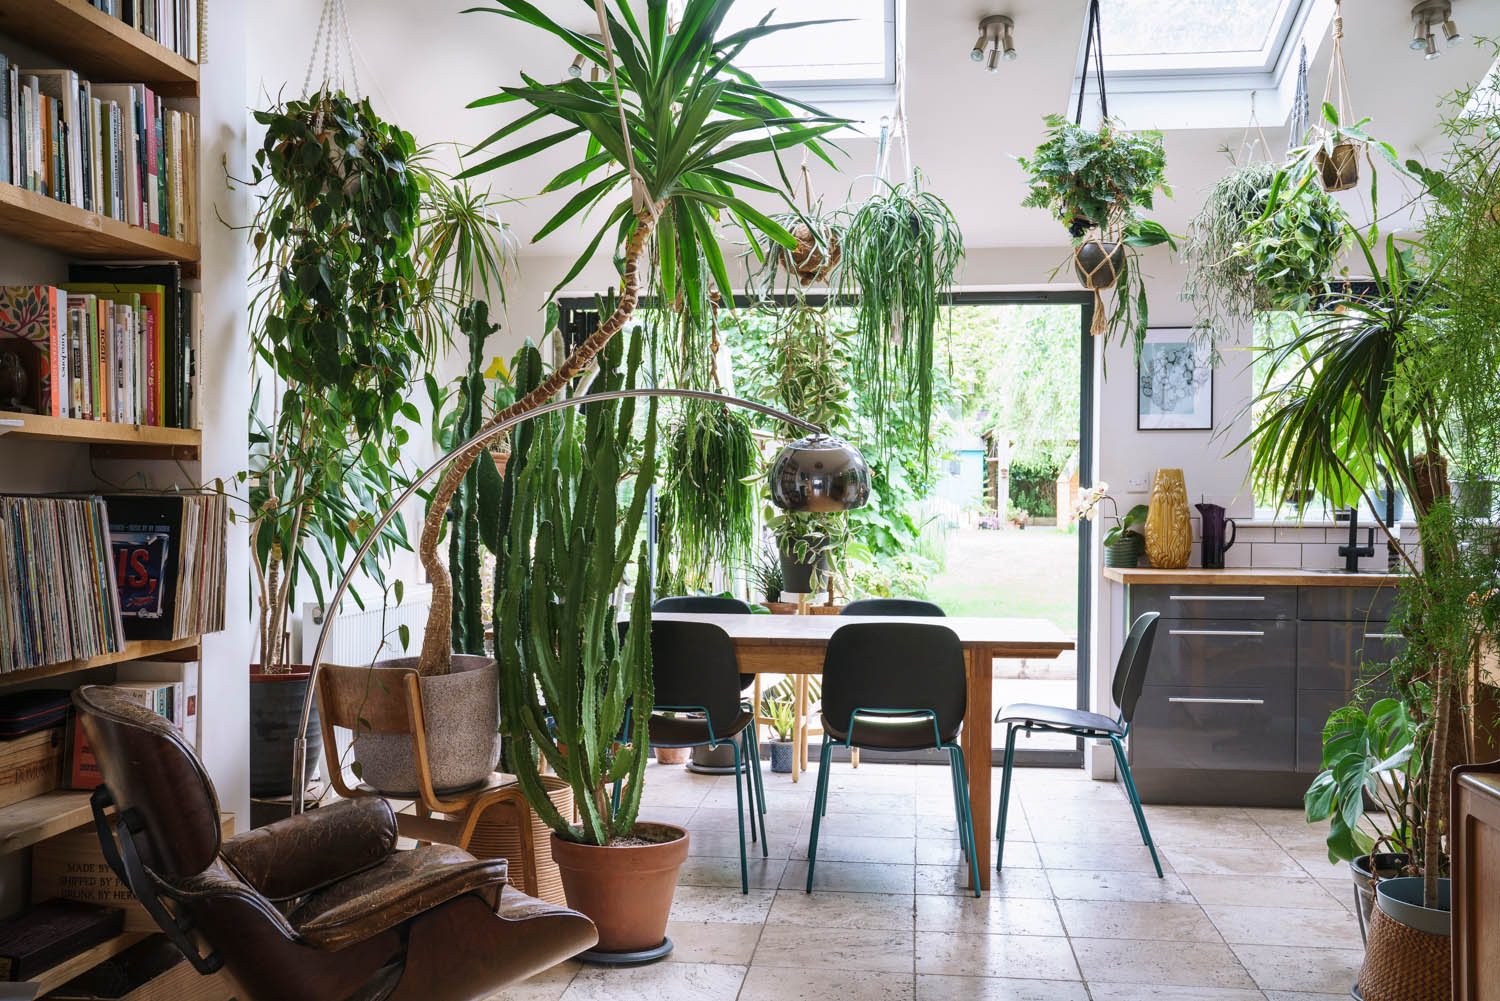 House plant guides and care